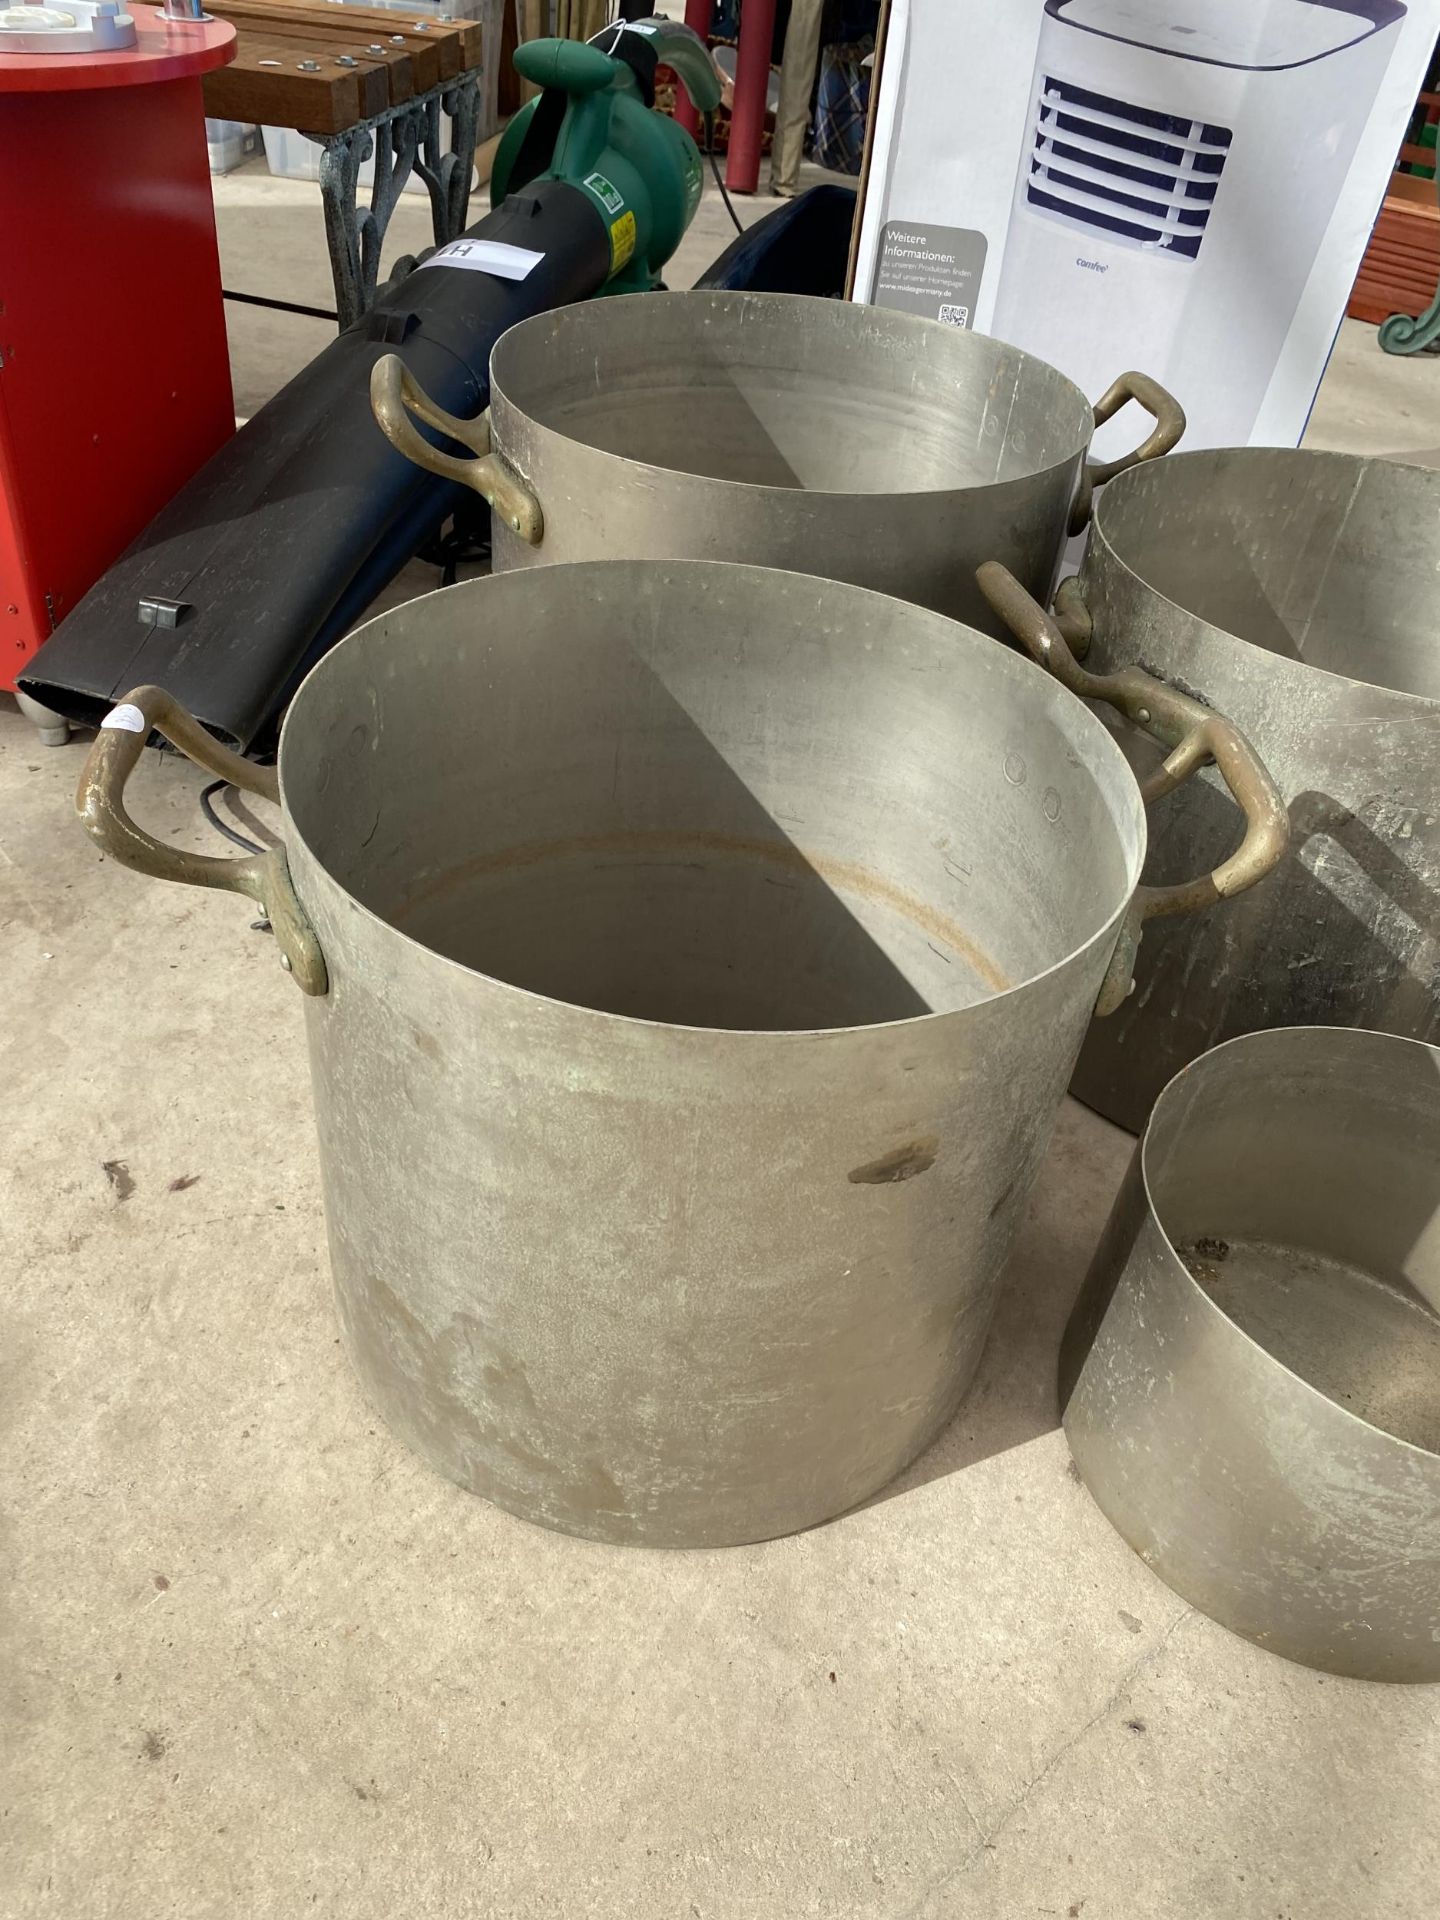 FOUR LARGE HEAVY DUTY COOKING POTS WITH BRASS HANDLES - Image 2 of 4